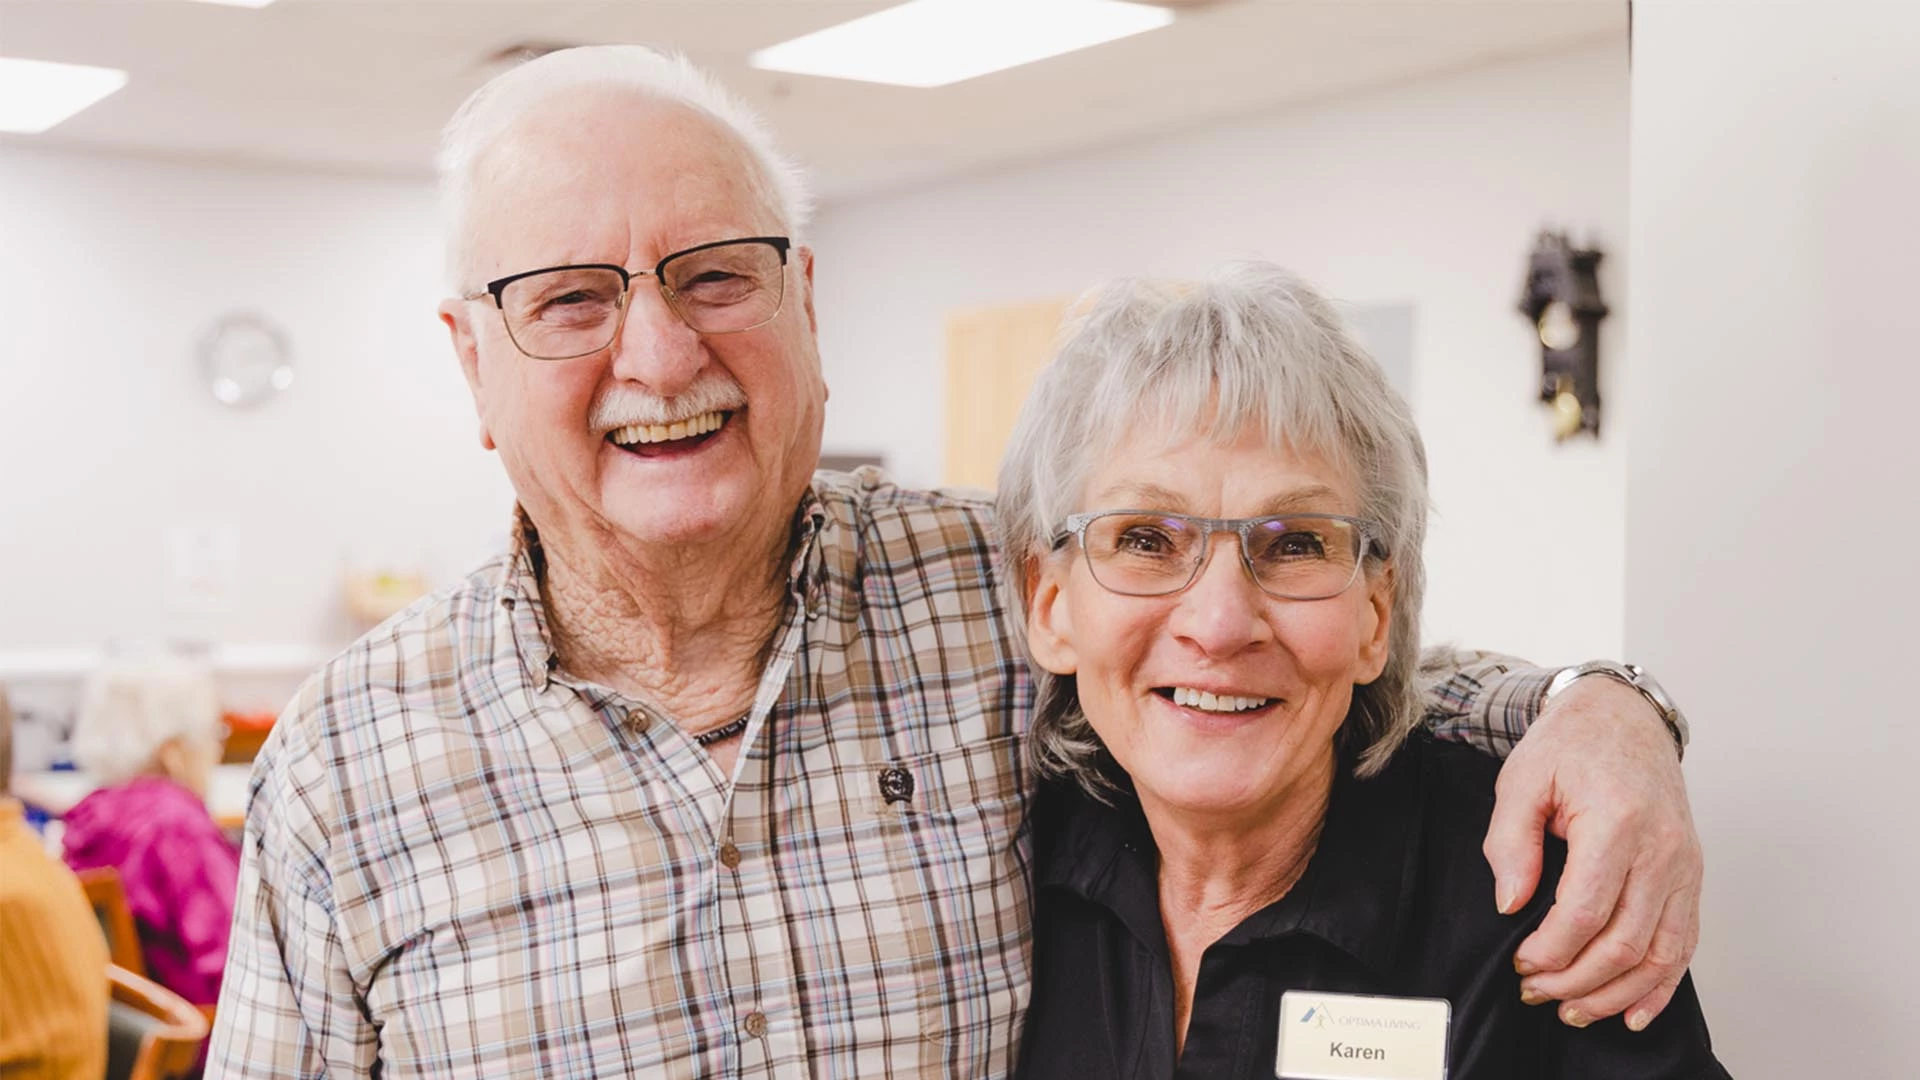 An elderly couple smiling with their arms around each other